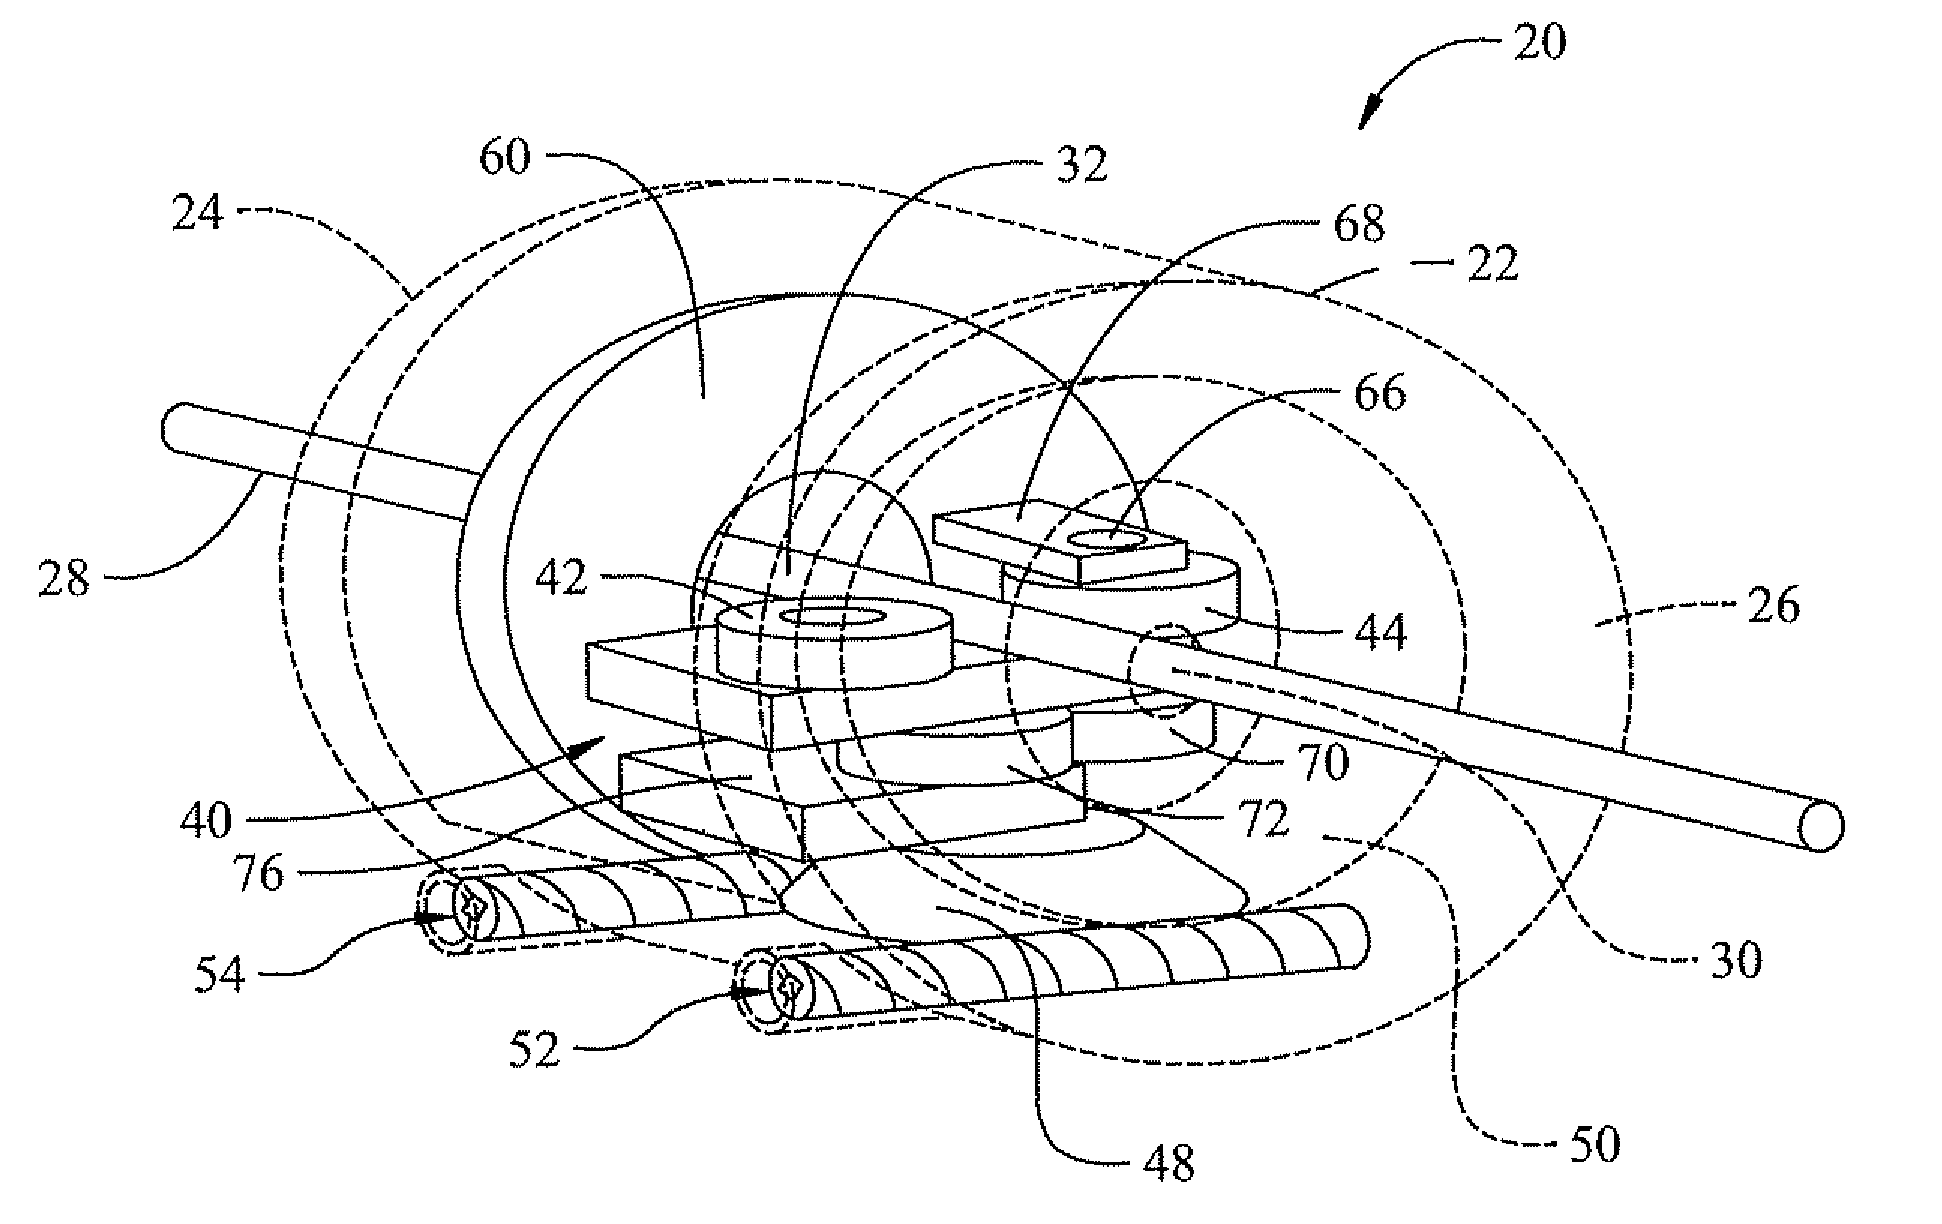 Apparatus for selectively rotating and/or advancing an elongate device